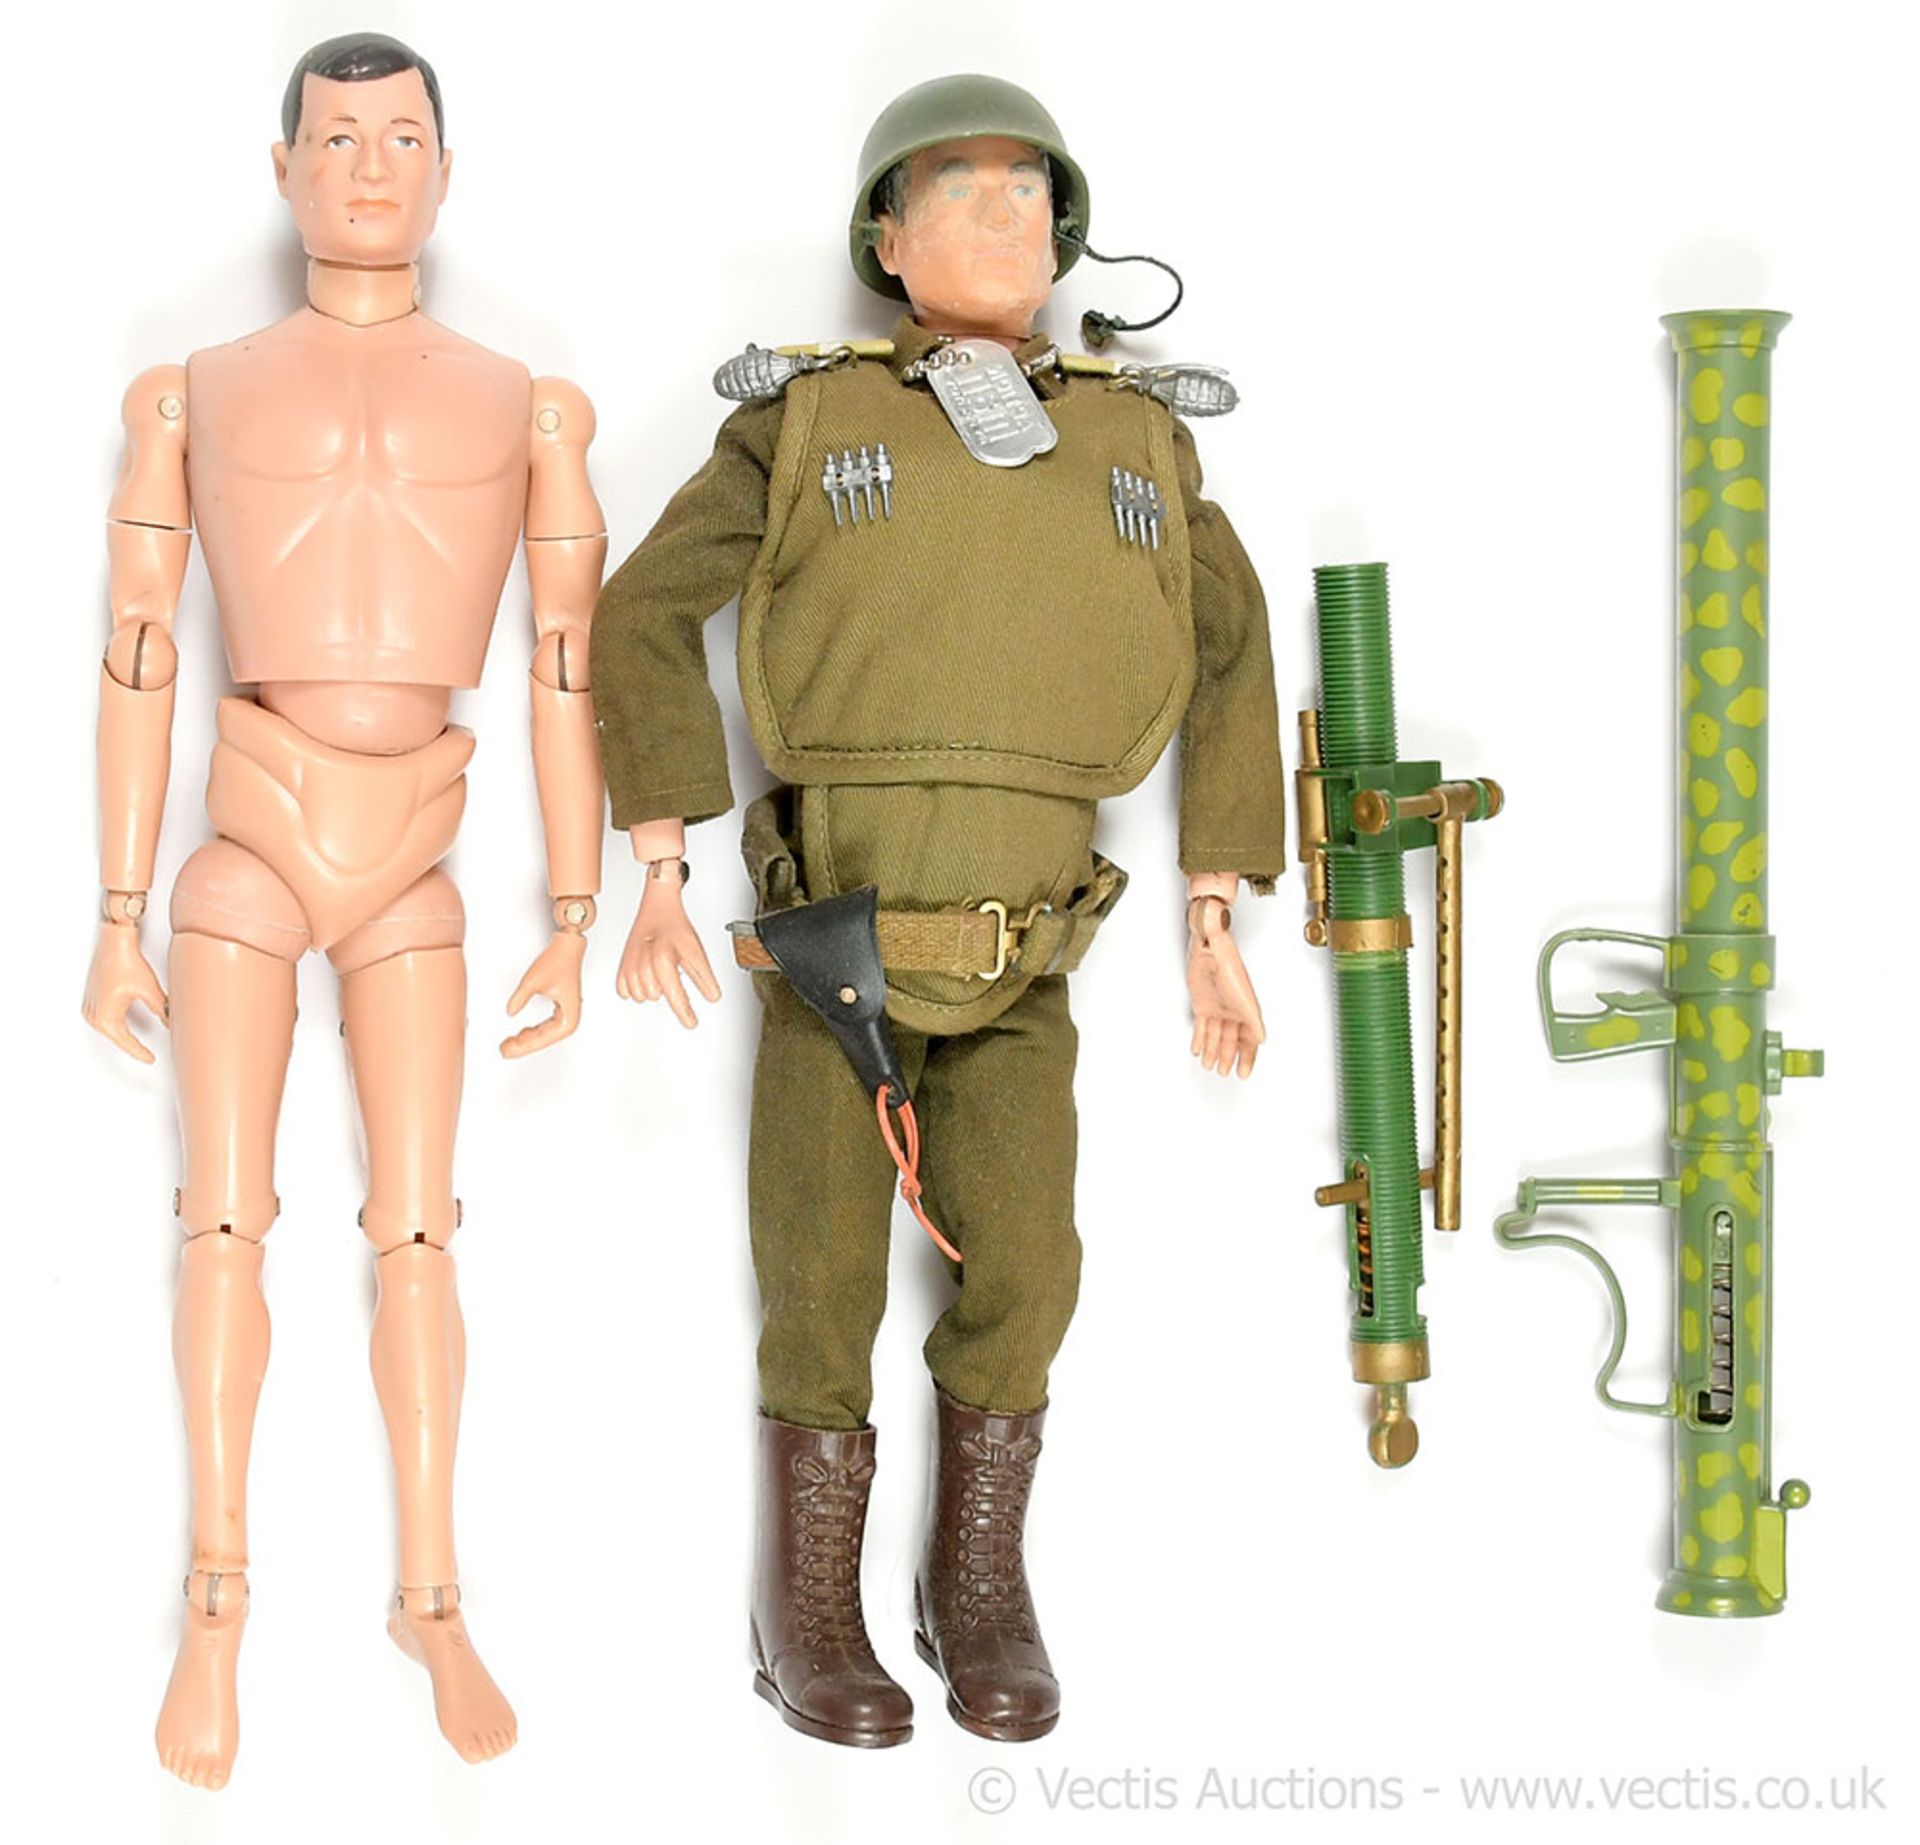 Palitoy Action Man Vintage - Infantry Support